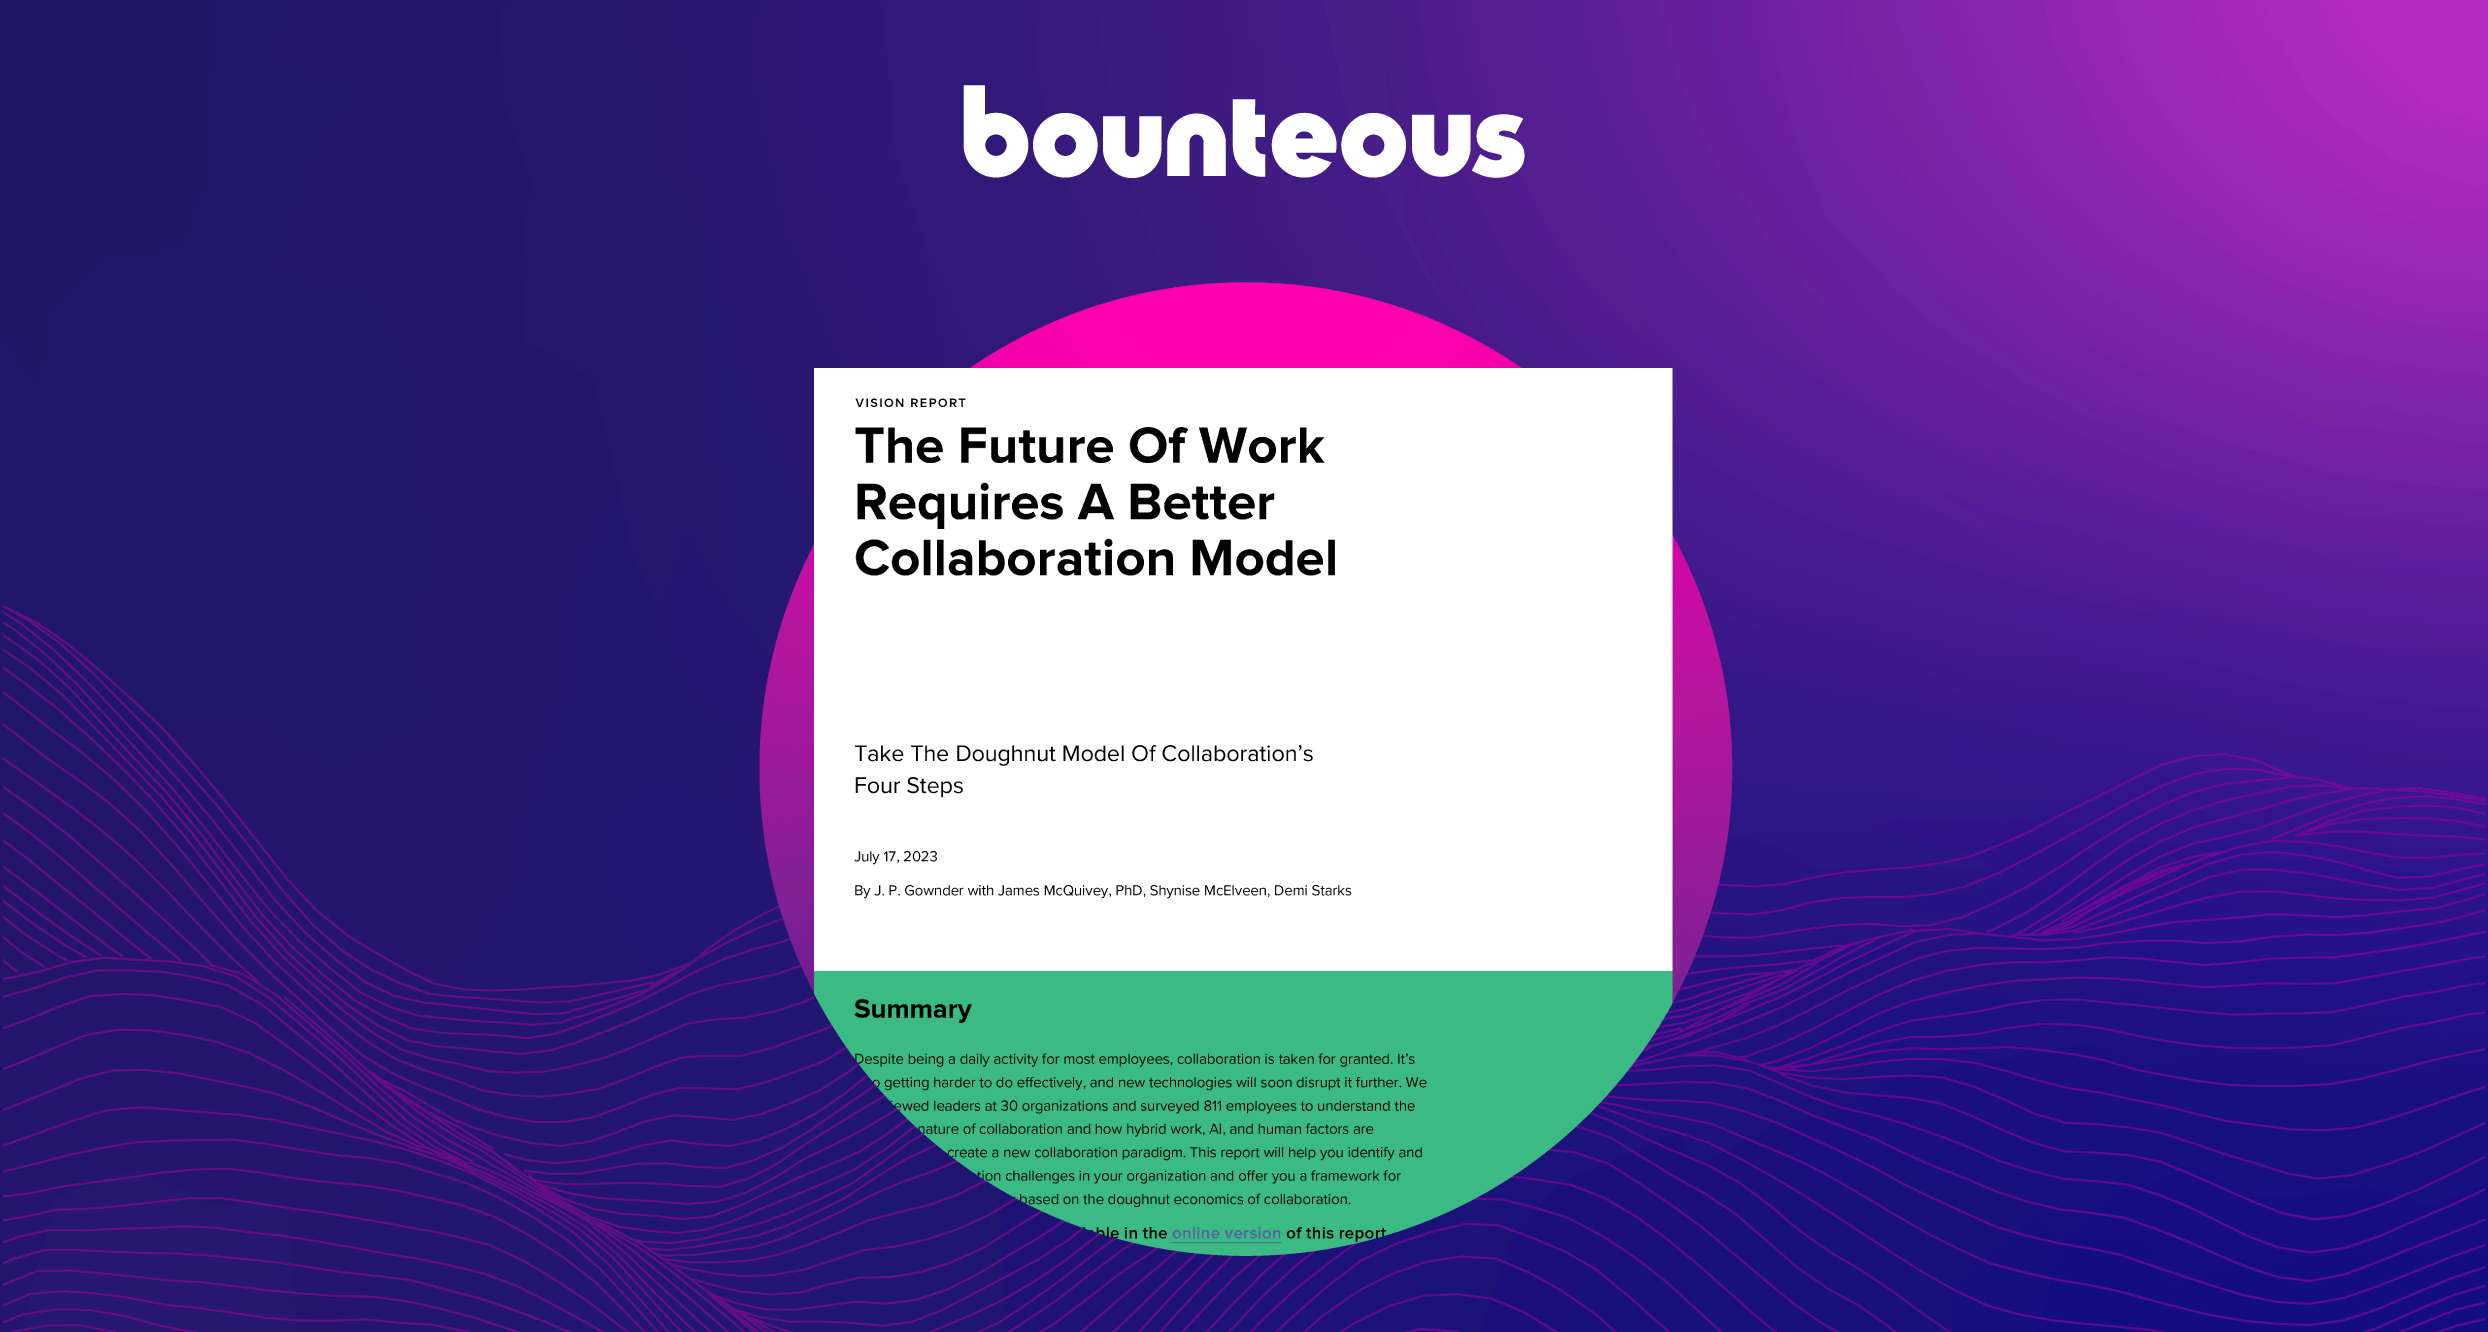 Press Release: Bounteous Recognized in Research Report, “The Future Of Work Requires A Better Collaboration Model”